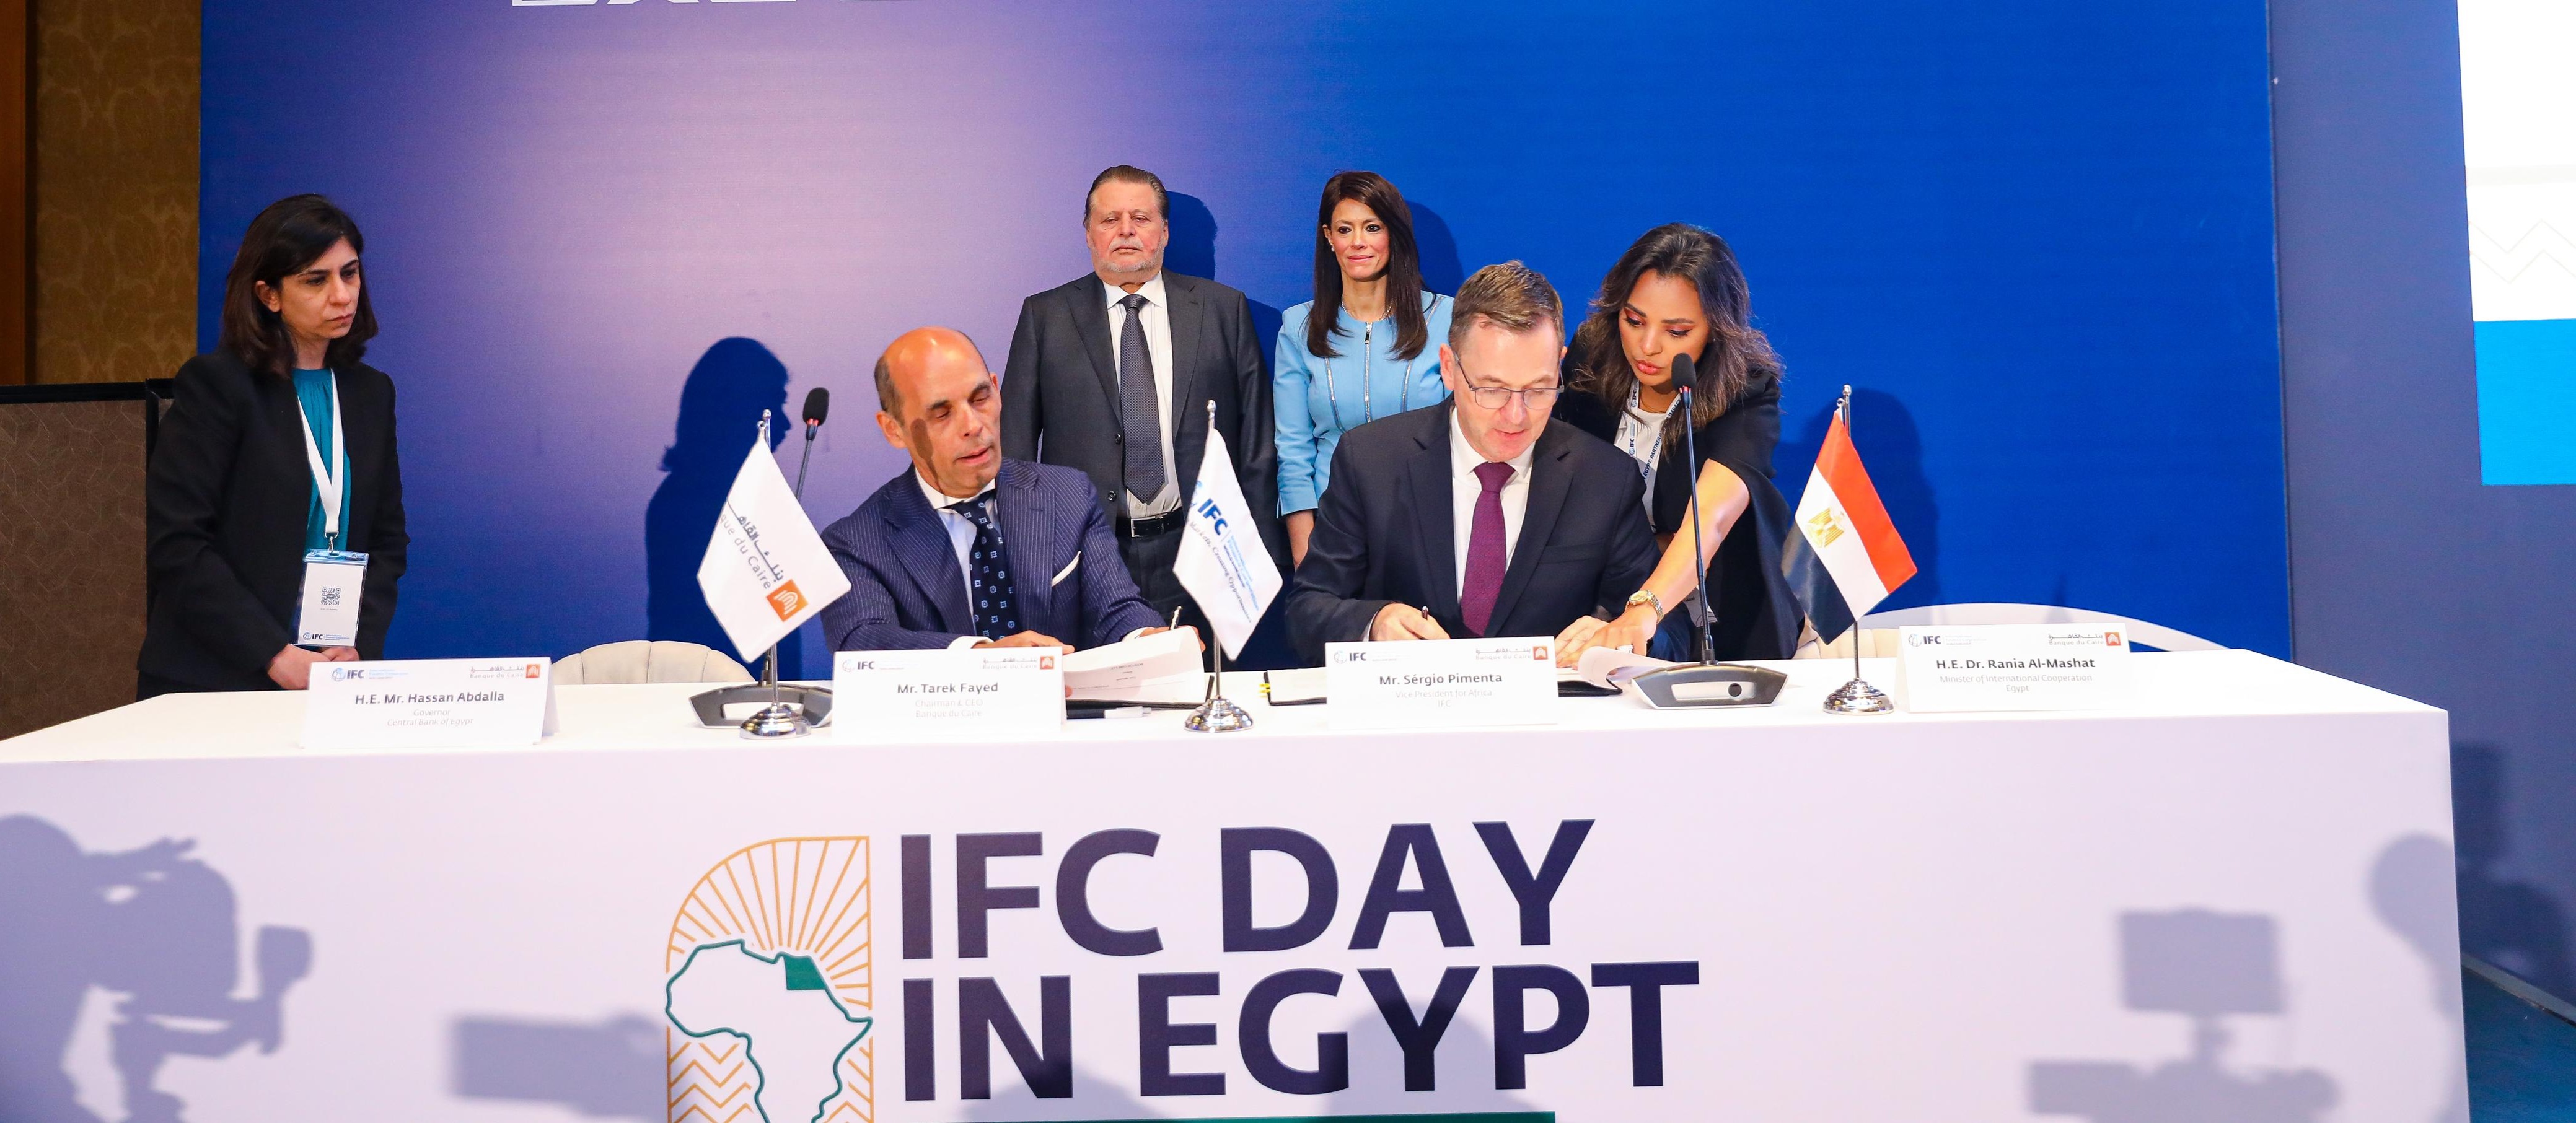 Banque du Caire pens $100M deal with IFC to support MSMEs, trade

